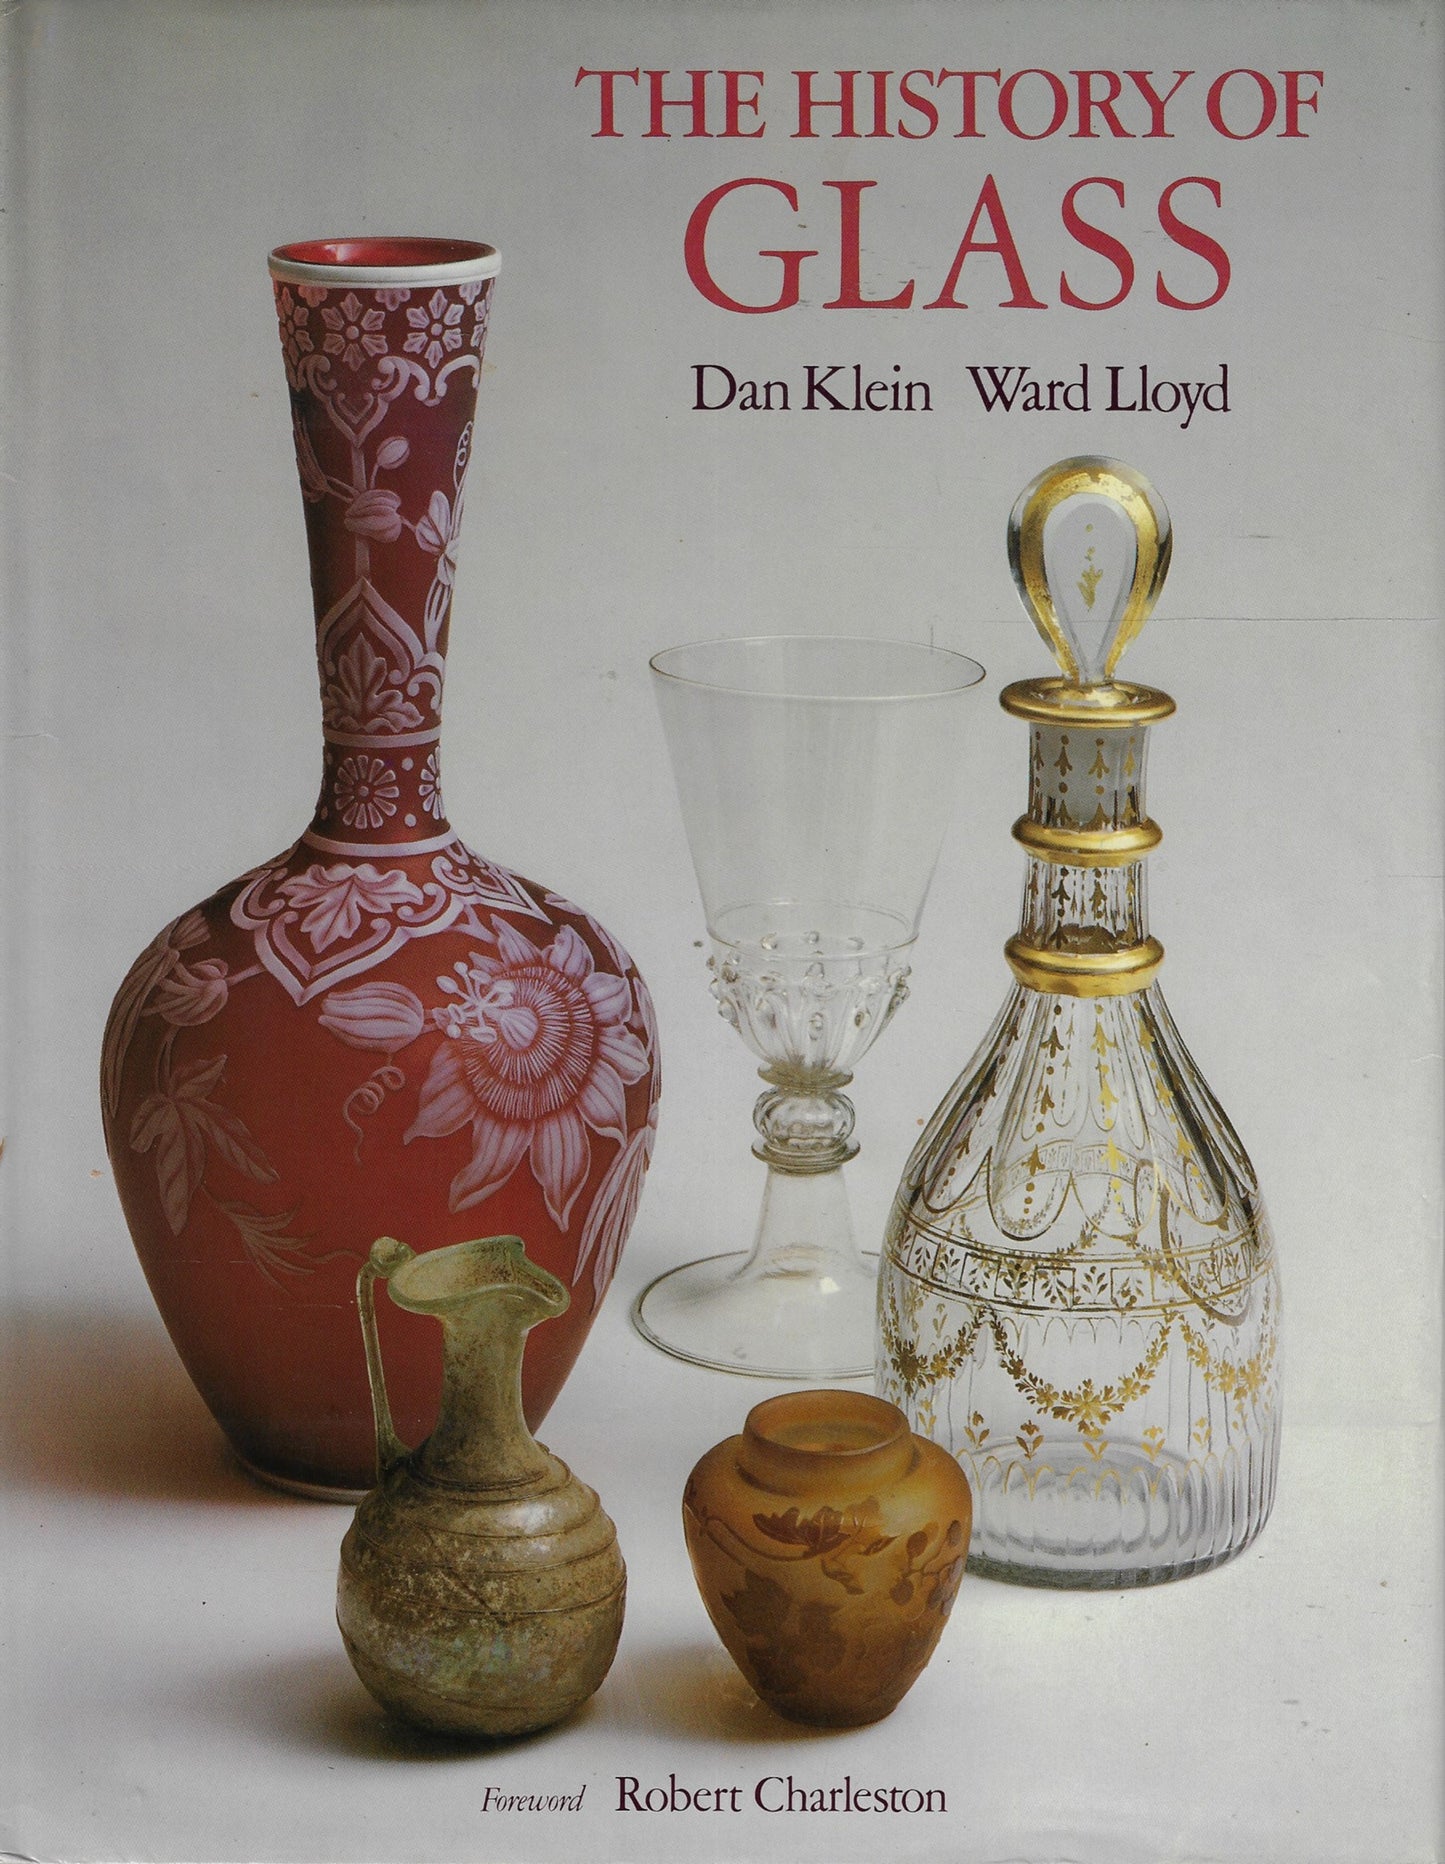 The history of glass